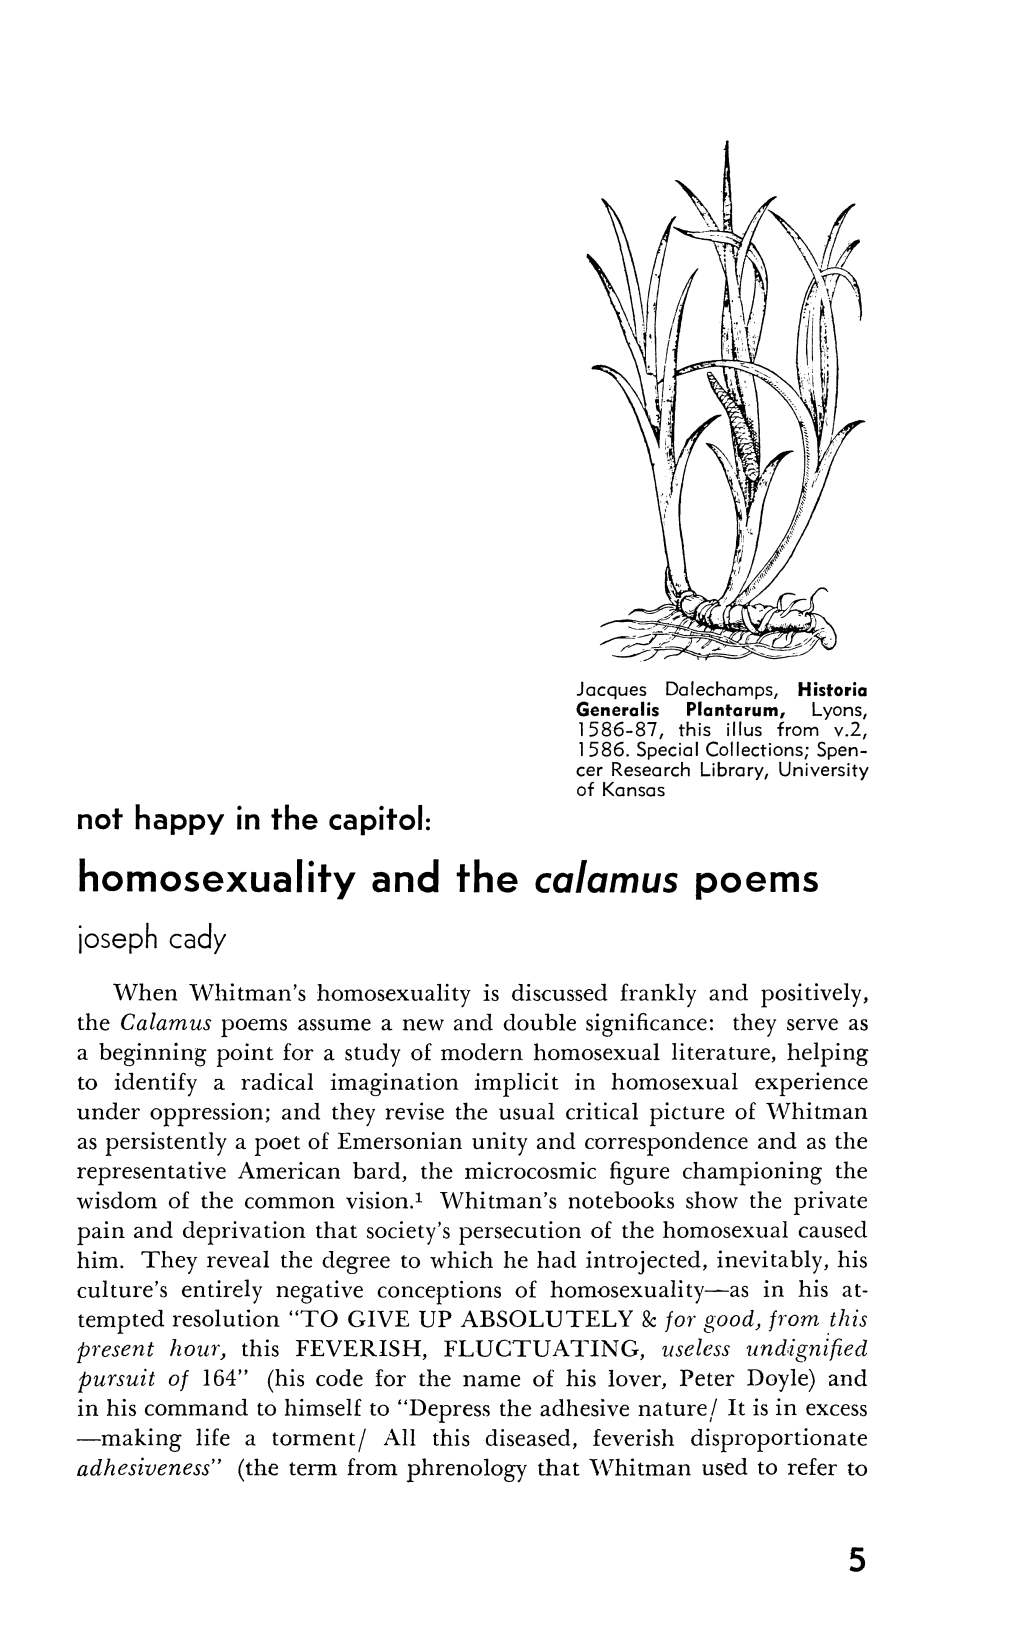 Homosexuality and the Calamus Poems Joseph Cady